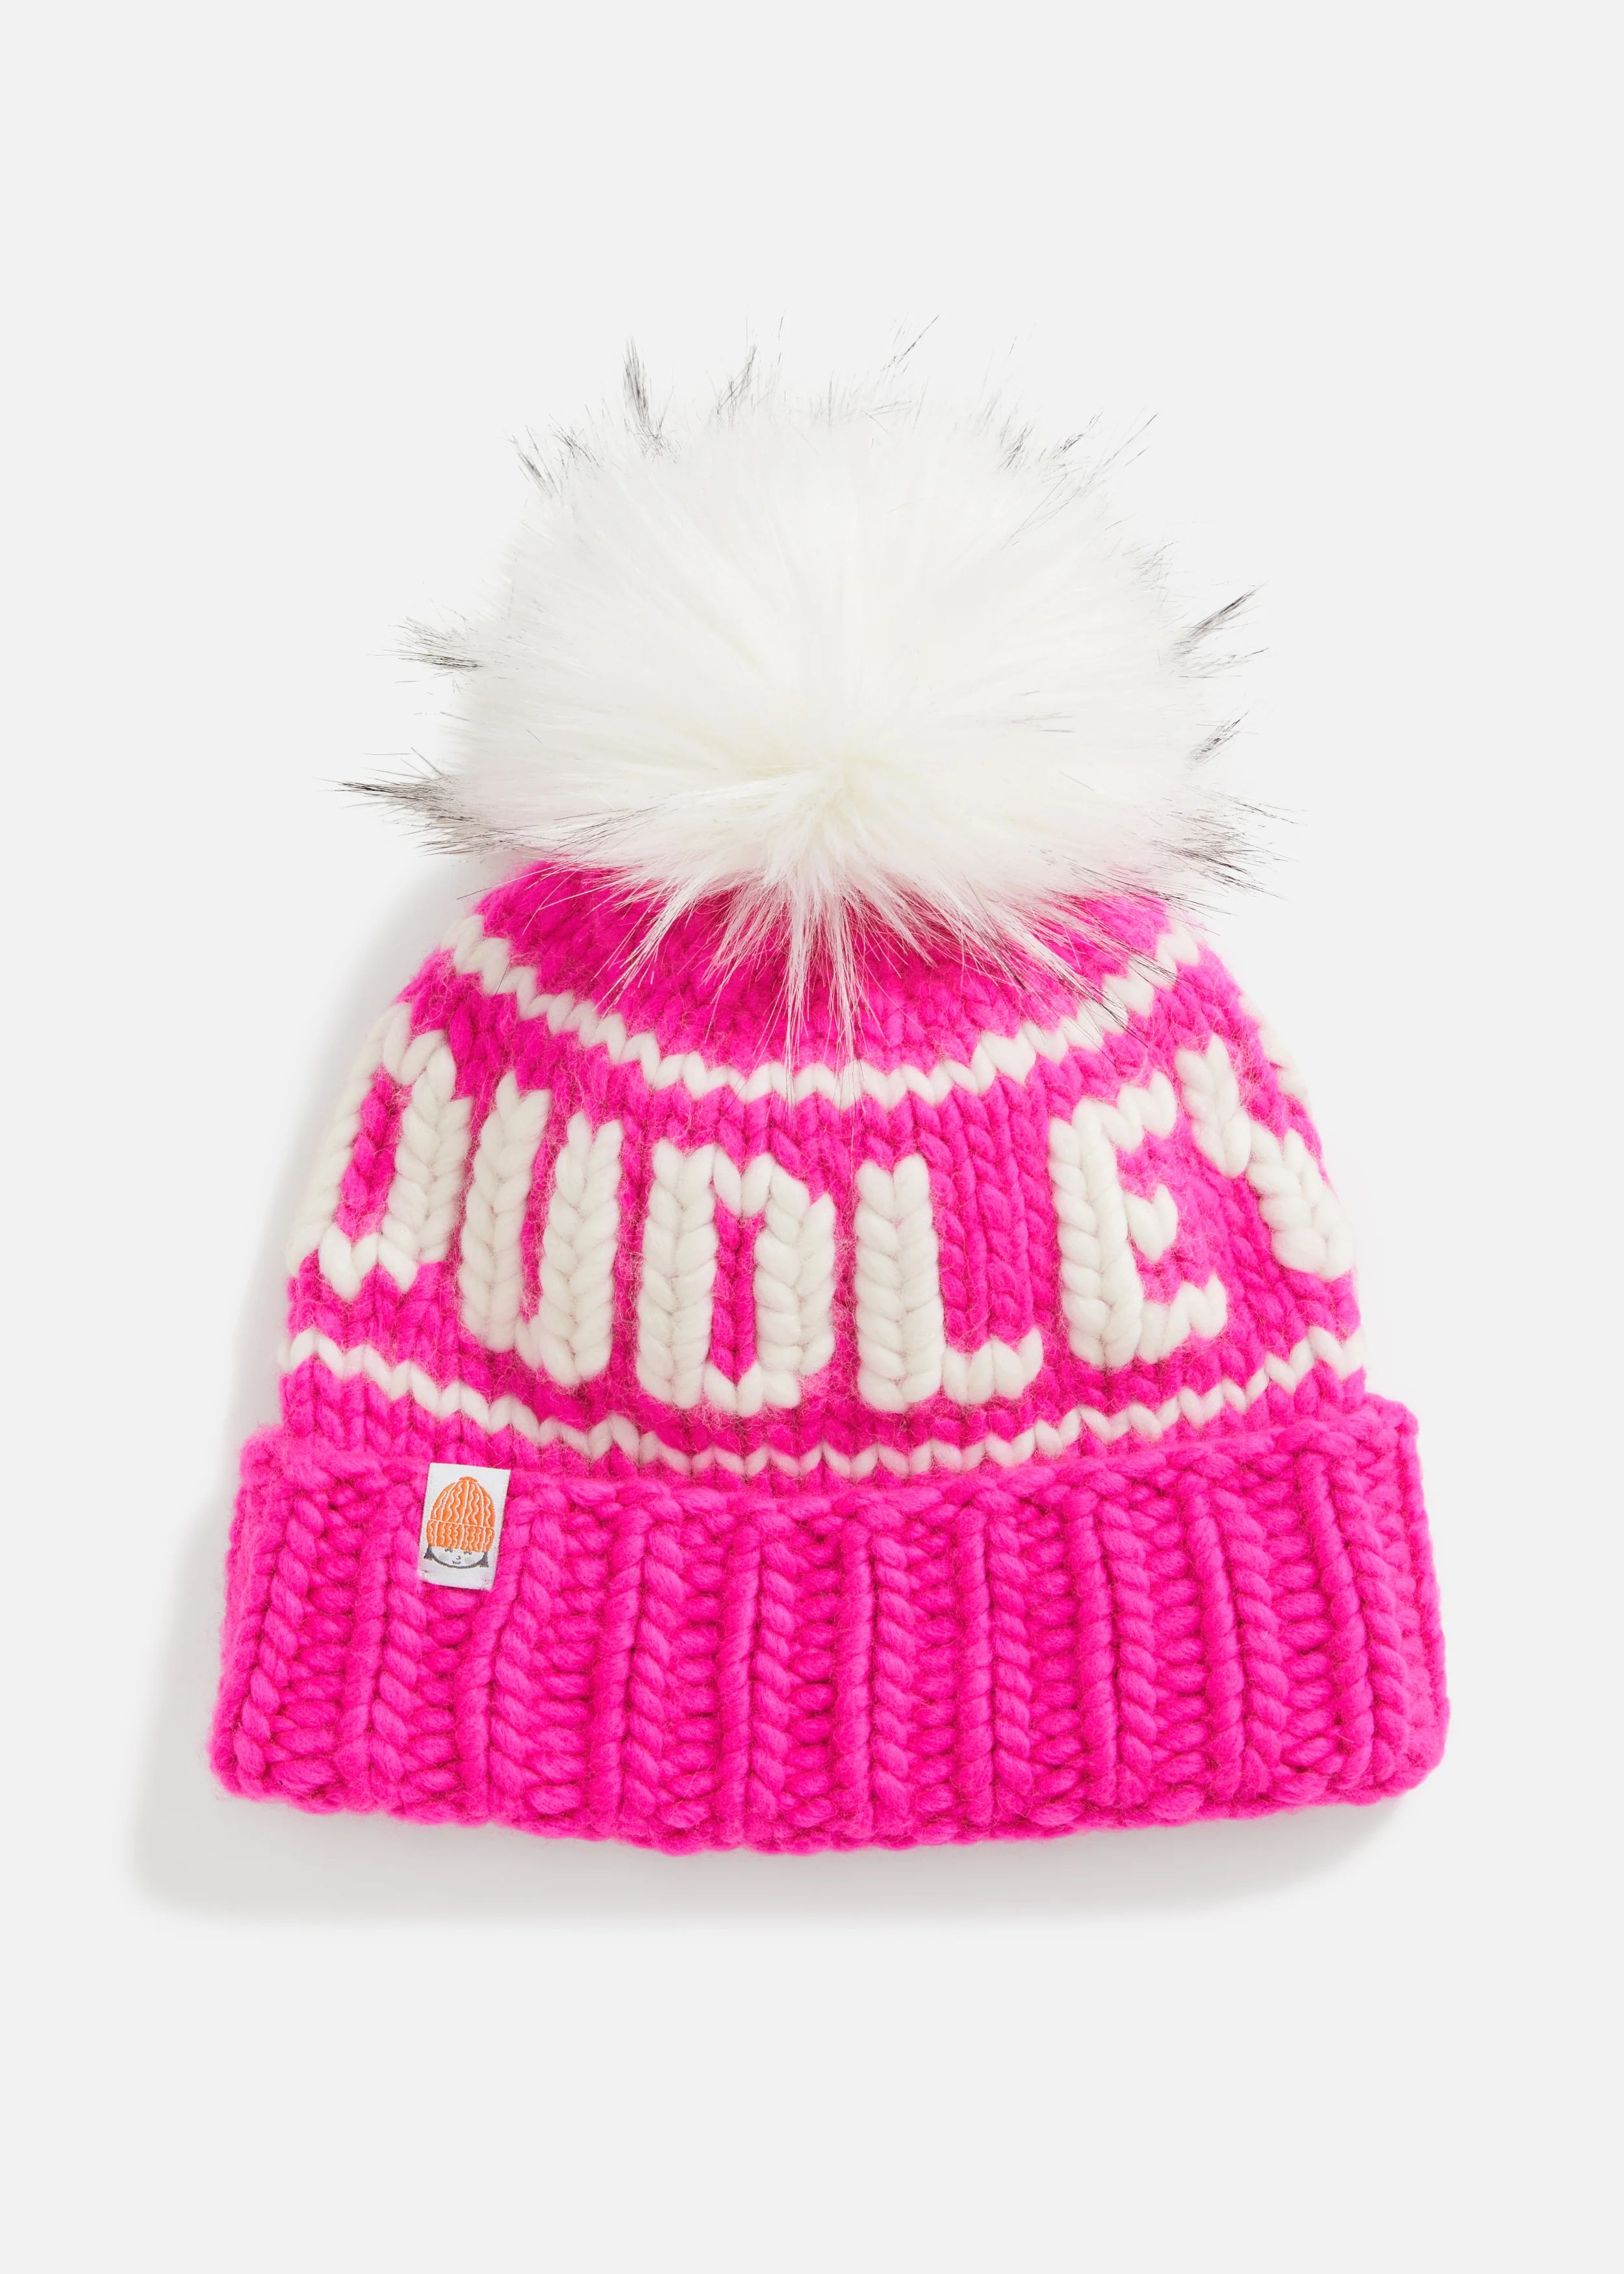 Dudley x STIK Hat (Hot Pink) | Dudley Stephens